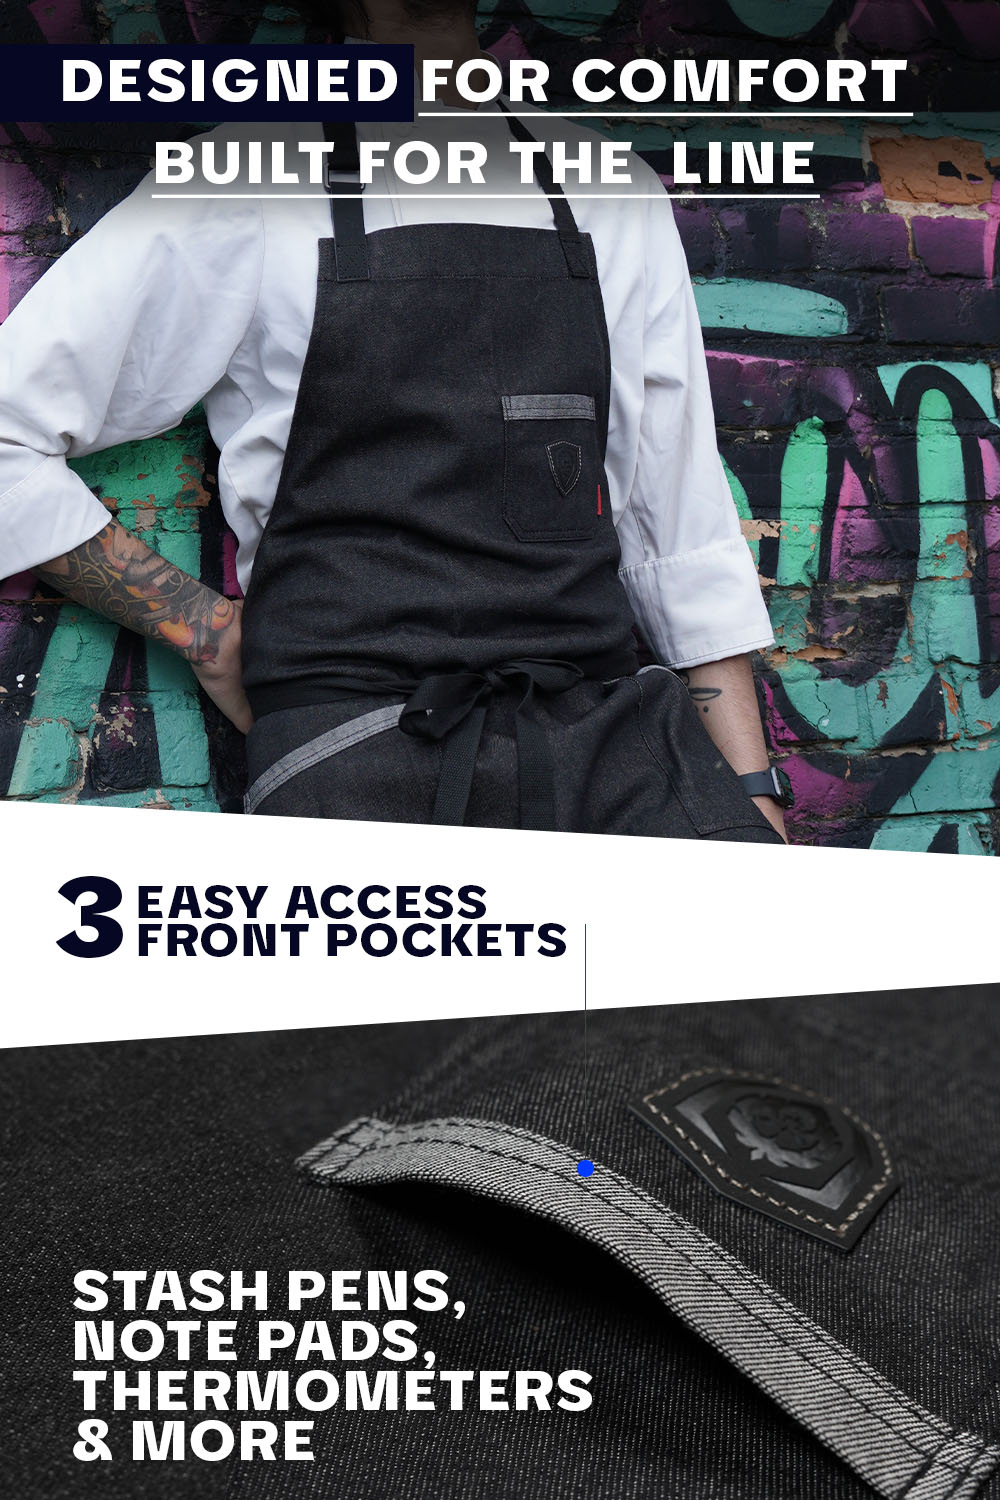 Dalstrong the night rider professional chef's kitchen apron showcasing it's comfortable design.